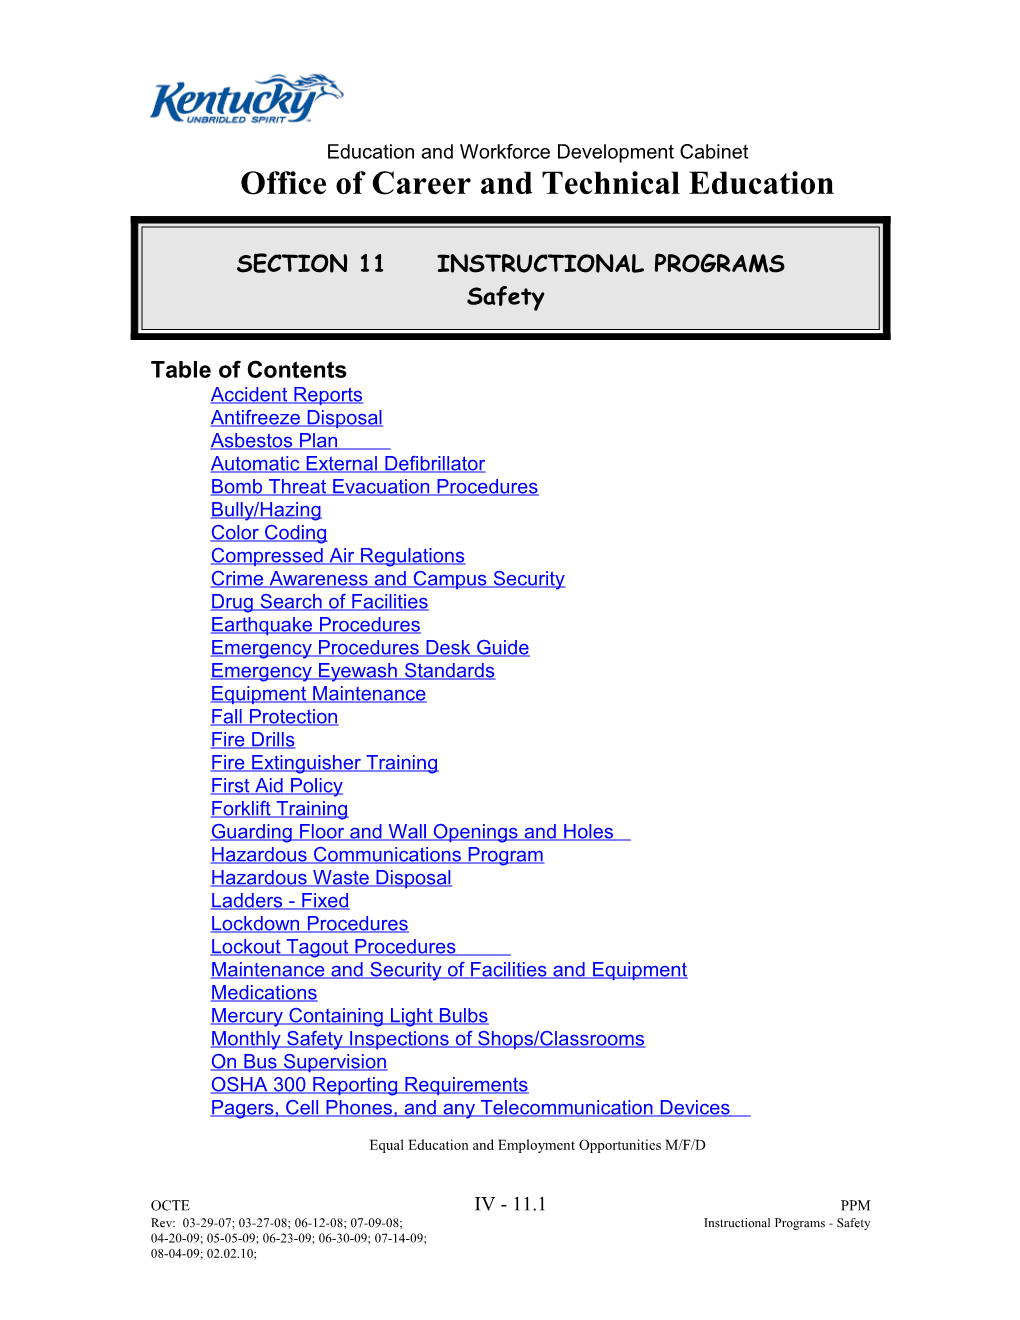 Office of Career and Technical Education s1